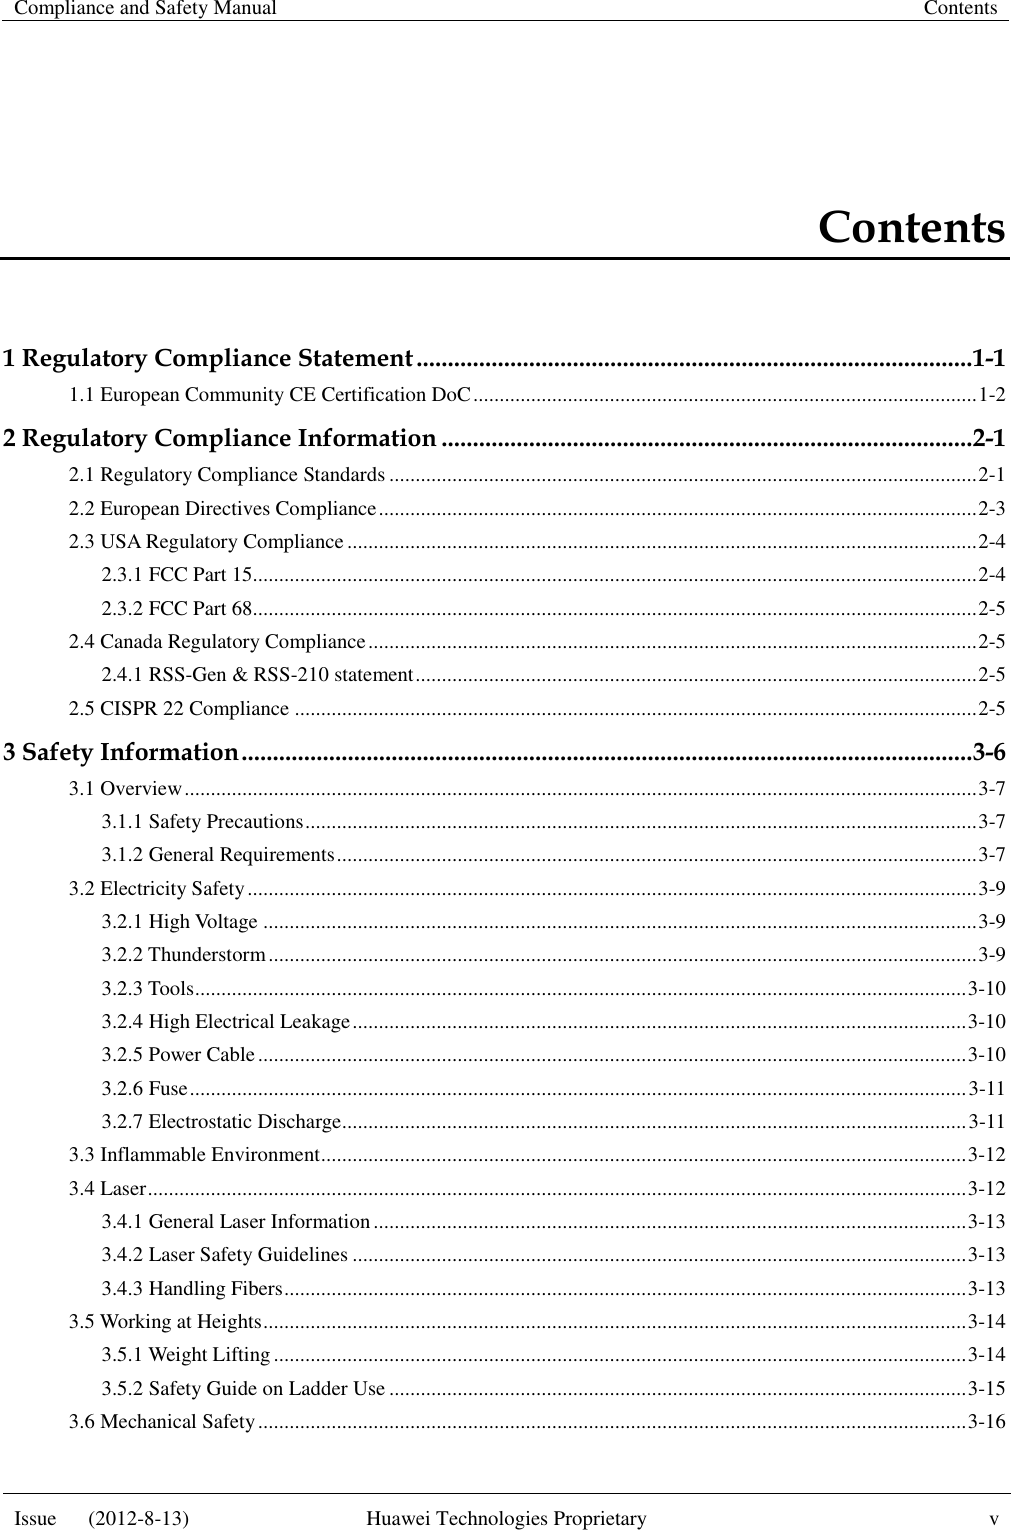 Compliance and Safety Manual Contents  Issue      (2012-8-13) Huawei Technologies Proprietary v  Contents 1 Regulatory Compliance Statement ......................................................................................... 1-1 1.1 European Community CE Certification DoC ................................................................................................ 1-2 2 Regulatory Compliance Information ..................................................................................... 2-1 2.1 Regulatory Compliance Standards ................................................................................................................ 2-1 2.2 European Directives Compliance .................................................................................................................. 2-3 2.3 USA Regulatory Compliance ........................................................................................................................ 2-4 2.3.1 FCC Part 15.......................................................................................................................................... 2-4 2.3.2 FCC Part 68.......................................................................................................................................... 2-5 2.4 Canada Regulatory Compliance .................................................................................................................... 2-5 2.4.1 RSS-Gen &amp; RSS-210 statement ........................................................................................................... 2-5 2.5 CISPR 22 Compliance .................................................................................................................................. 2-5 3 Safety Information ..................................................................................................................... 3-6 3.1 Overview ....................................................................................................................................................... 3-7 3.1.1 Safety Precautions ................................................................................................................................ 3-7 3.1.2 General Requirements .......................................................................................................................... 3-7 3.2 Electricity Safety ........................................................................................................................................... 3-9 3.2.1 High Voltage ........................................................................................................................................ 3-9 3.2.2 Thunderstorm ....................................................................................................................................... 3-9 3.2.3 Tools ................................................................................................................................................... 3-10 3.2.4 High Electrical Leakage ..................................................................................................................... 3-10 3.2.5 Power Cable ....................................................................................................................................... 3-10 3.2.6 Fuse .................................................................................................................................................... 3-11 3.2.7 Electrostatic Discharge....................................................................................................................... 3-11 3.3 Inflammable Environment ........................................................................................................................... 3-12 3.4 Laser ............................................................................................................................................................ 3-12 3.4.1 General Laser Information ................................................................................................................. 3-13 3.4.2 Laser Safety Guidelines ..................................................................................................................... 3-13 3.4.3 Handling Fibers .................................................................................................................................. 3-13 3.5 Working at Heights ...................................................................................................................................... 3-14 3.5.1 Weight Lifting .................................................................................................................................... 3-14 3.5.2 Safety Guide on Ladder Use .............................................................................................................. 3-15 3.6 Mechanical Safety ....................................................................................................................................... 3-16 